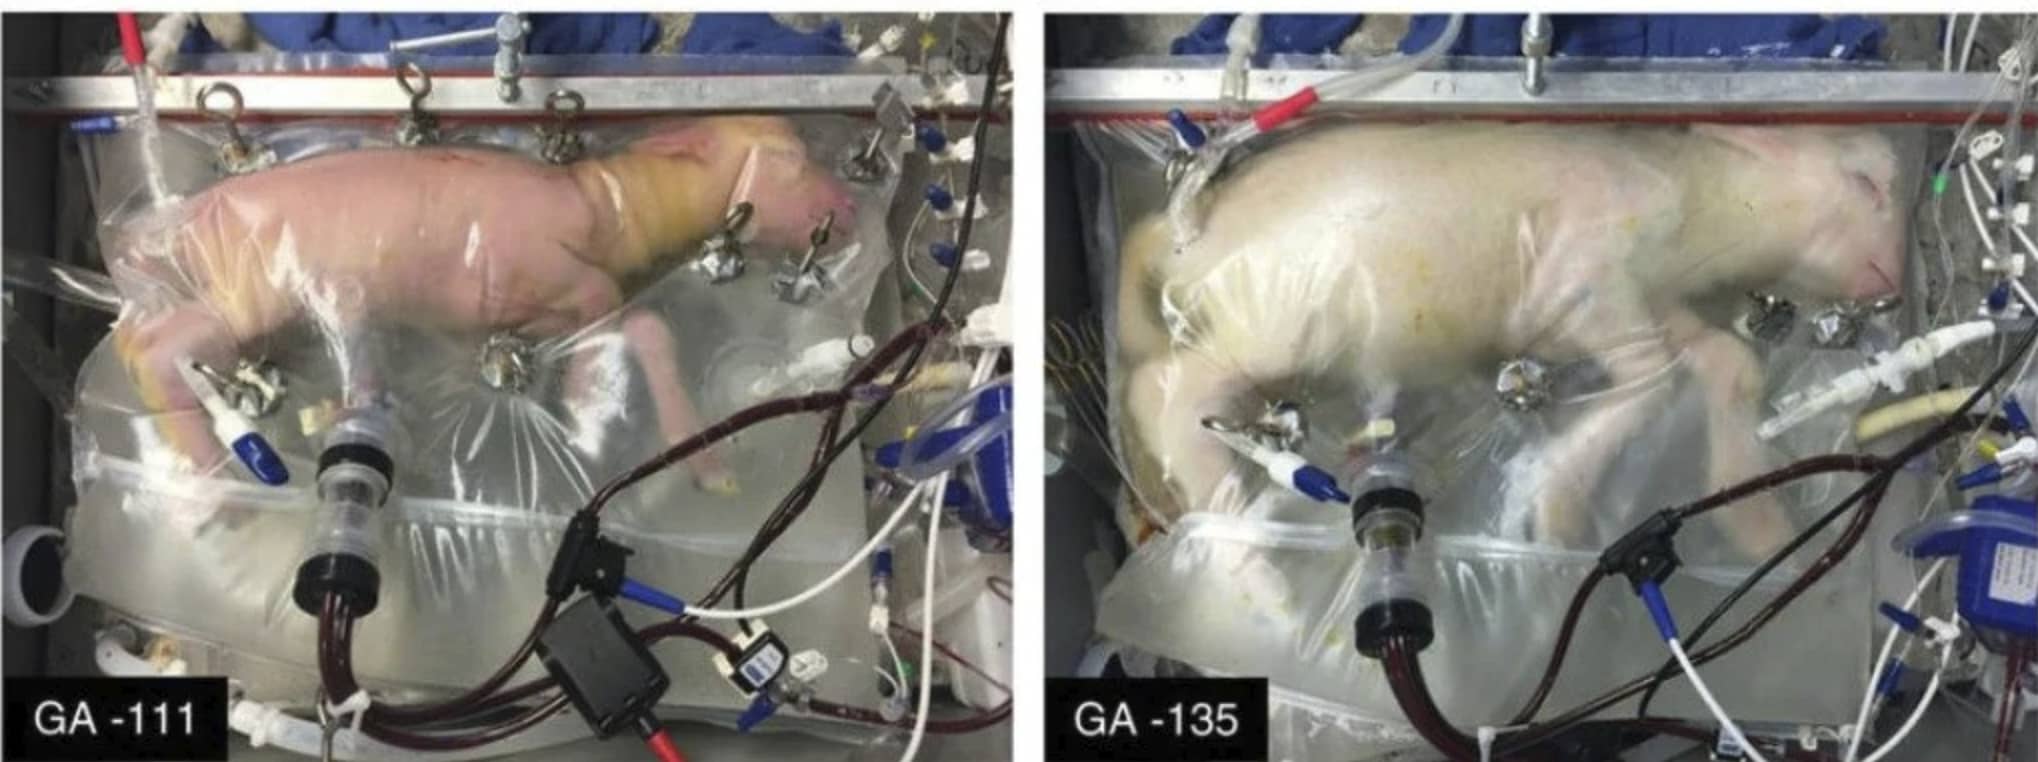 Researchers Have Successfully Grown Premature Lambs In An Artificial Womb